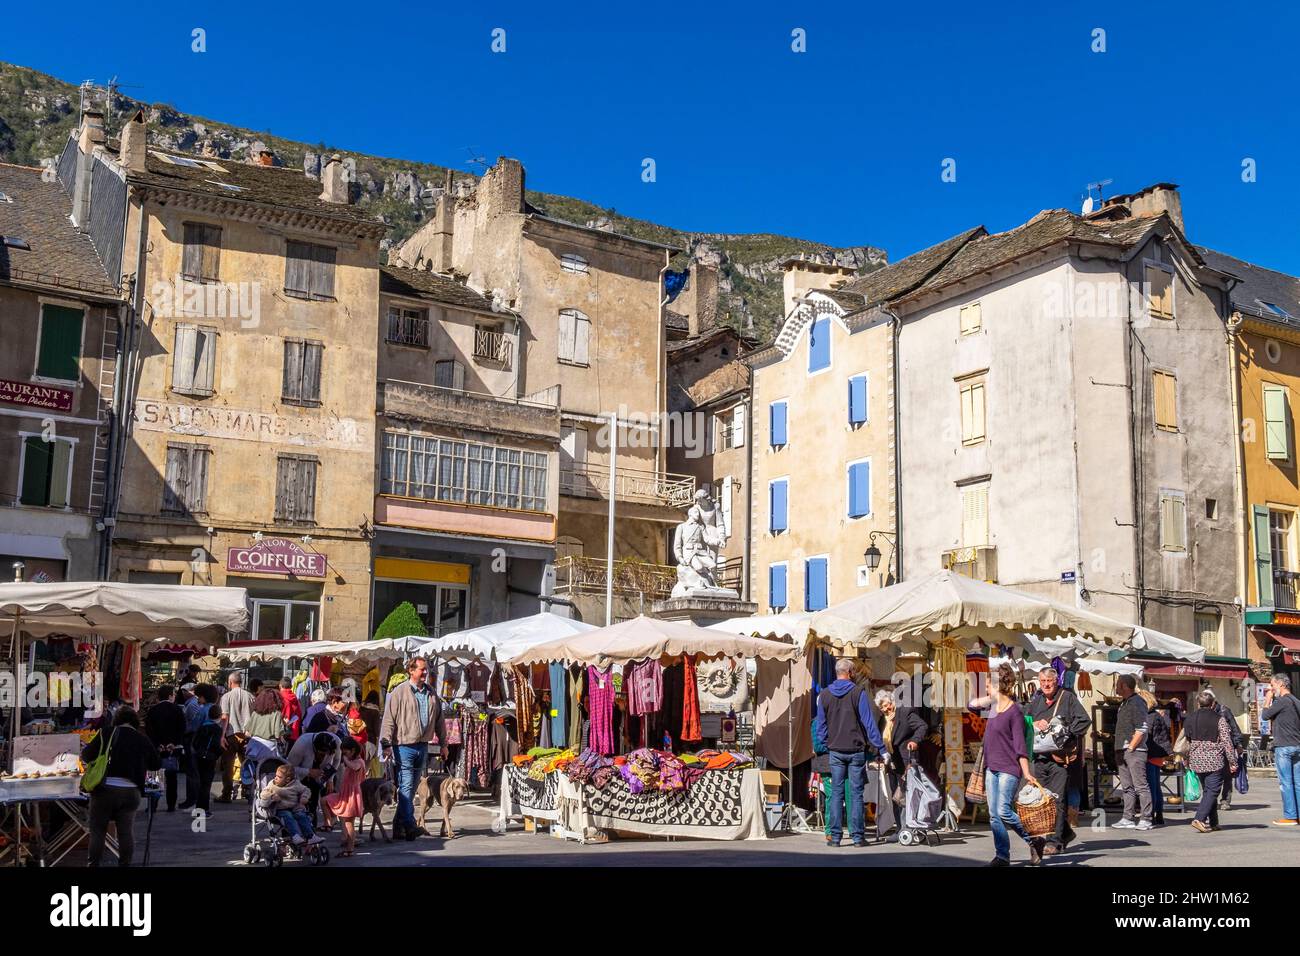 France, Lozere, the Causses and the Cevennes, Mediterranean agro pastoral cultural landscape, listed as World Heritage by UNESCO, Cevennes National Park (Parc National des Cevennes), listed as Biosphere Reserve by UNESCO, Florac market day Stock Photo